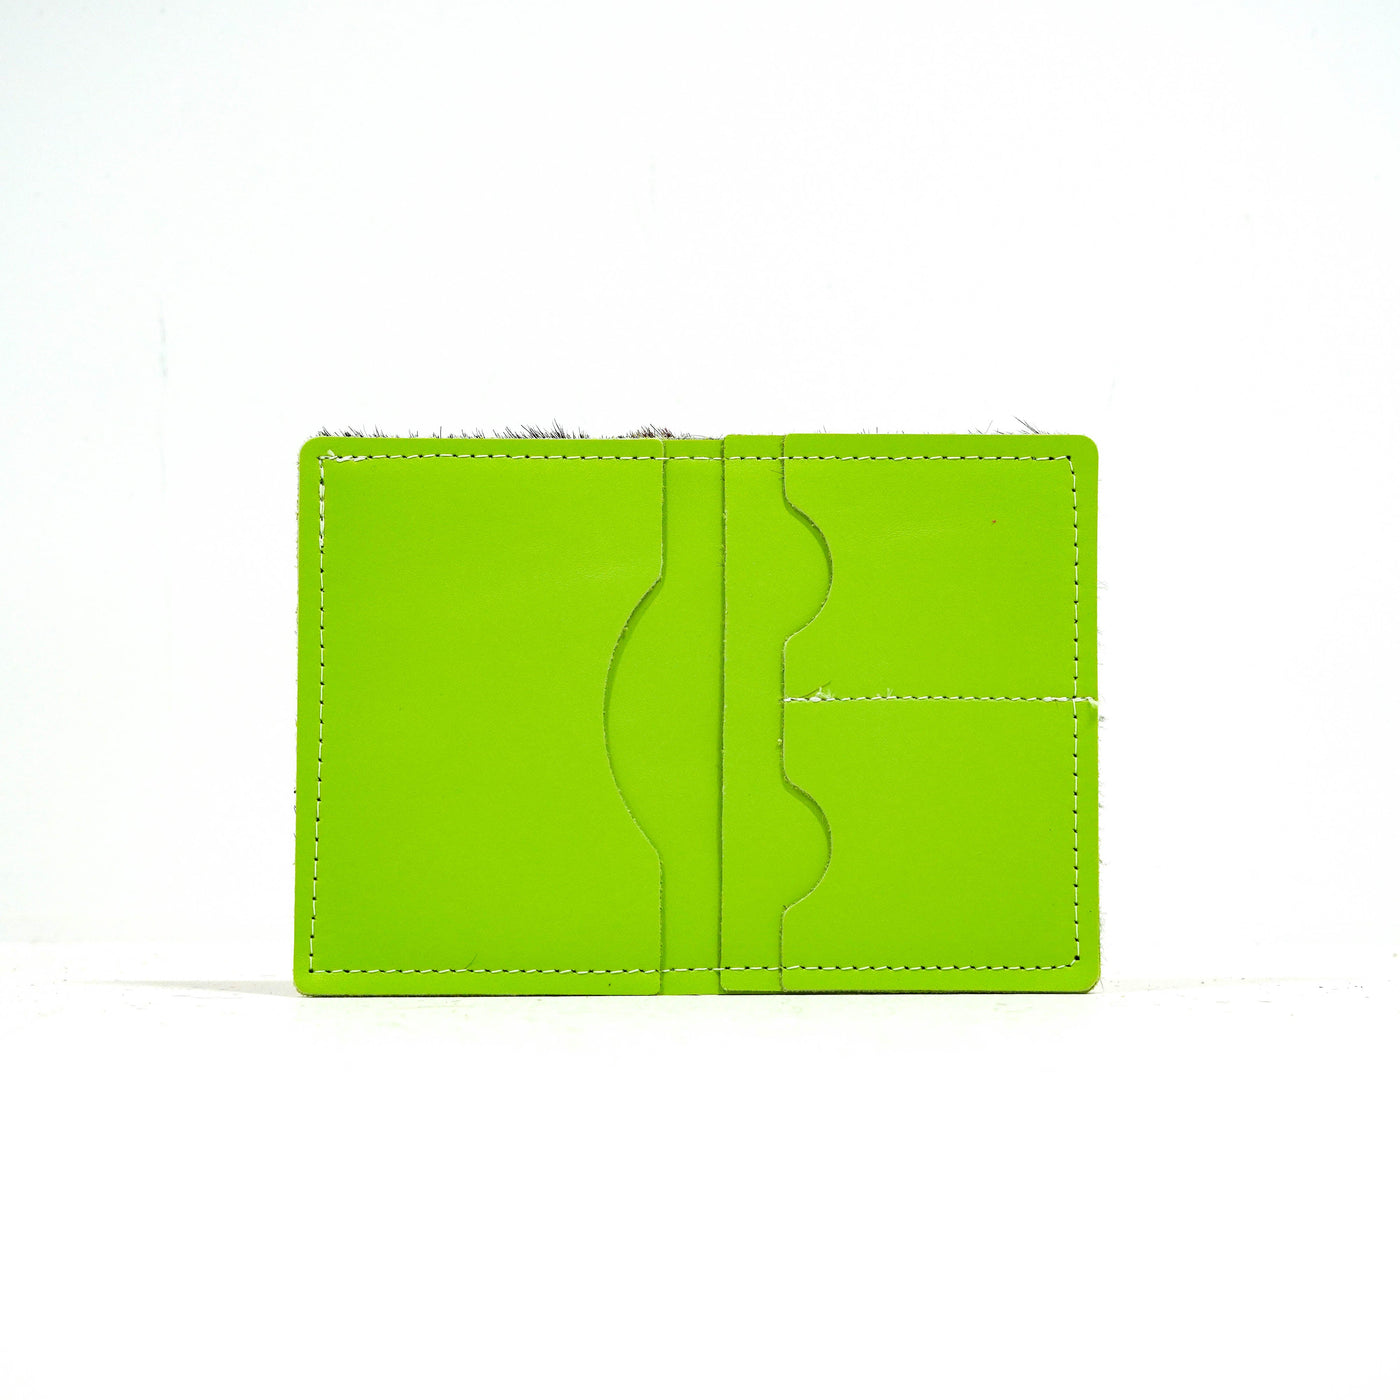 Waylon Wallet - Brindle w/ Lime Green Leather-Waylon Wallet-Western-Cowhide-Bags-Handmade-Products-Gifts-Dancing Cactus Designs